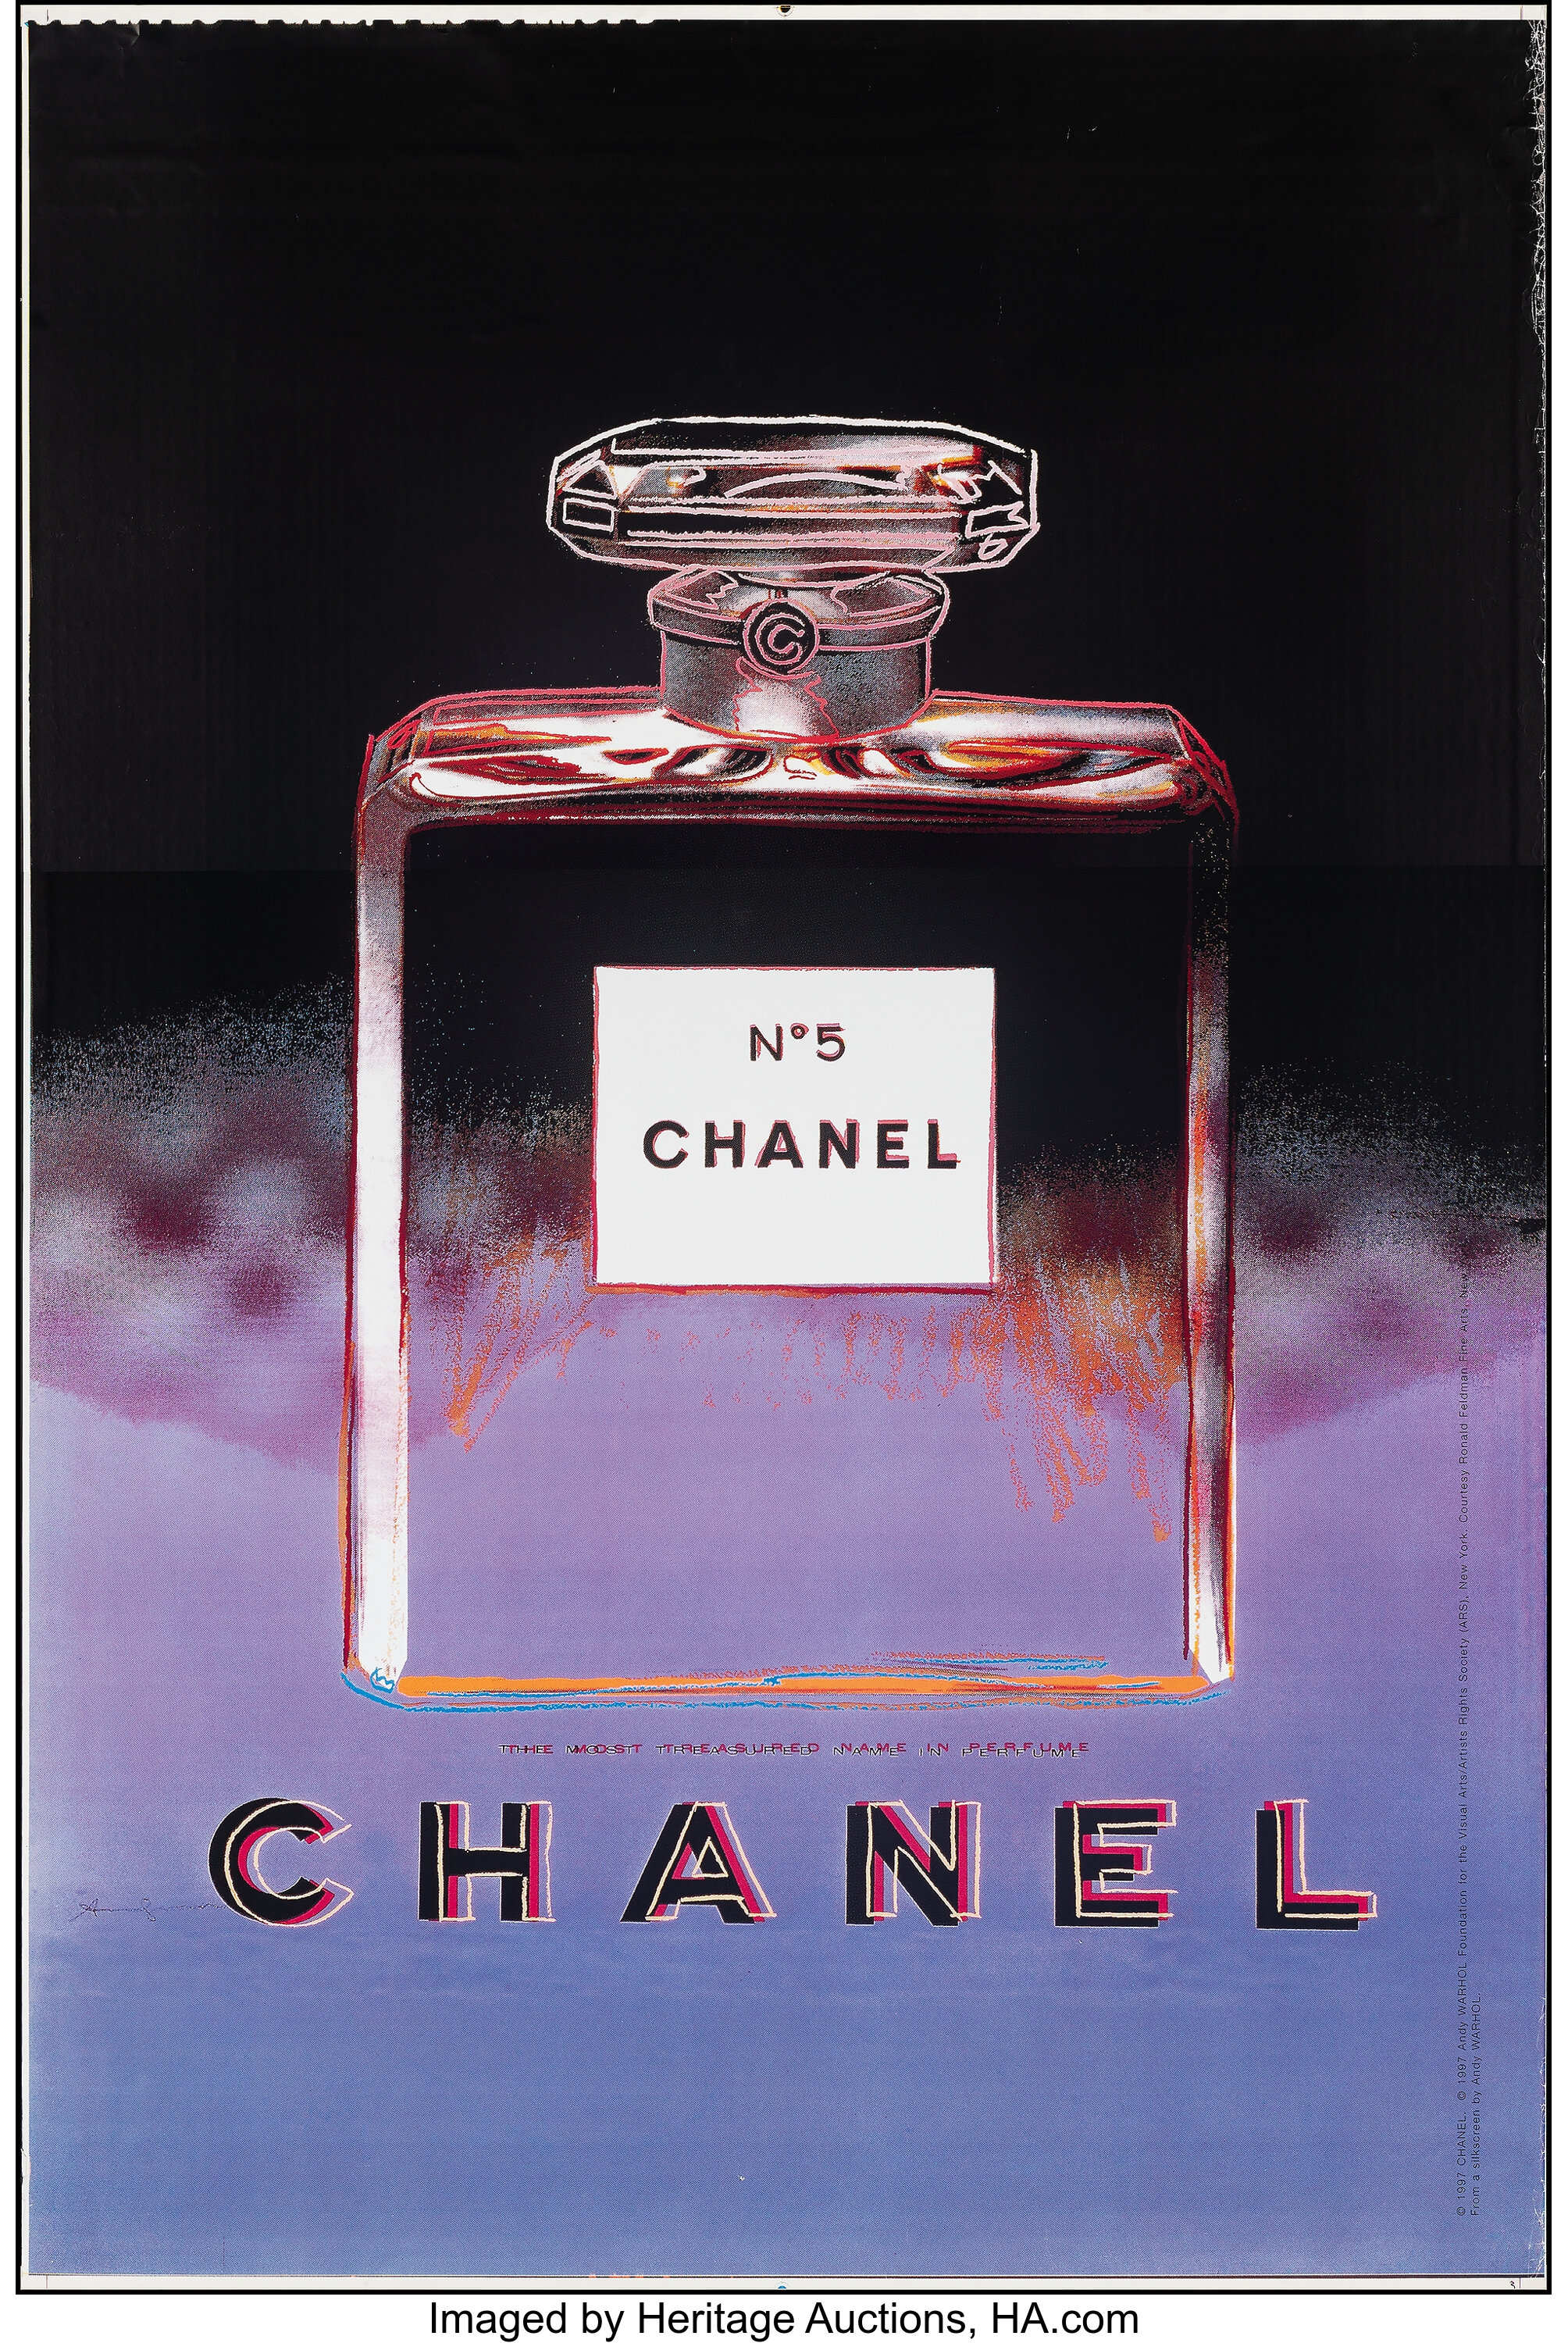 Original Vintage Chanel No. 5 Perfume Poster by Andy Warhol 1997 – The Ross  Art Group